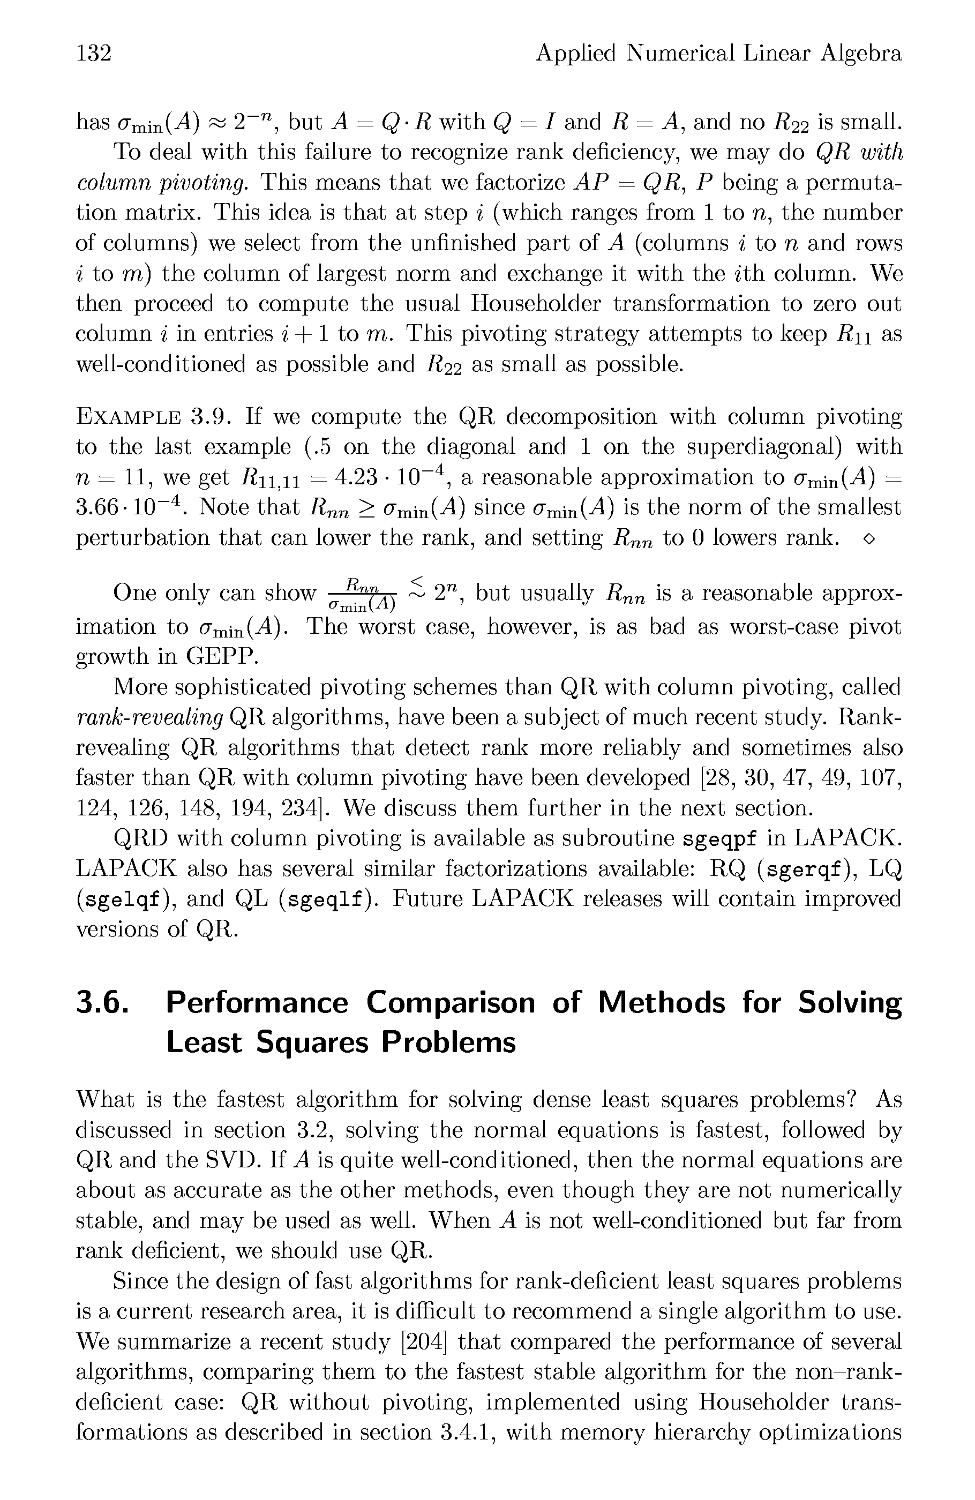 3.6 Performance Comparison of Methods for Solving Least Squares Problems